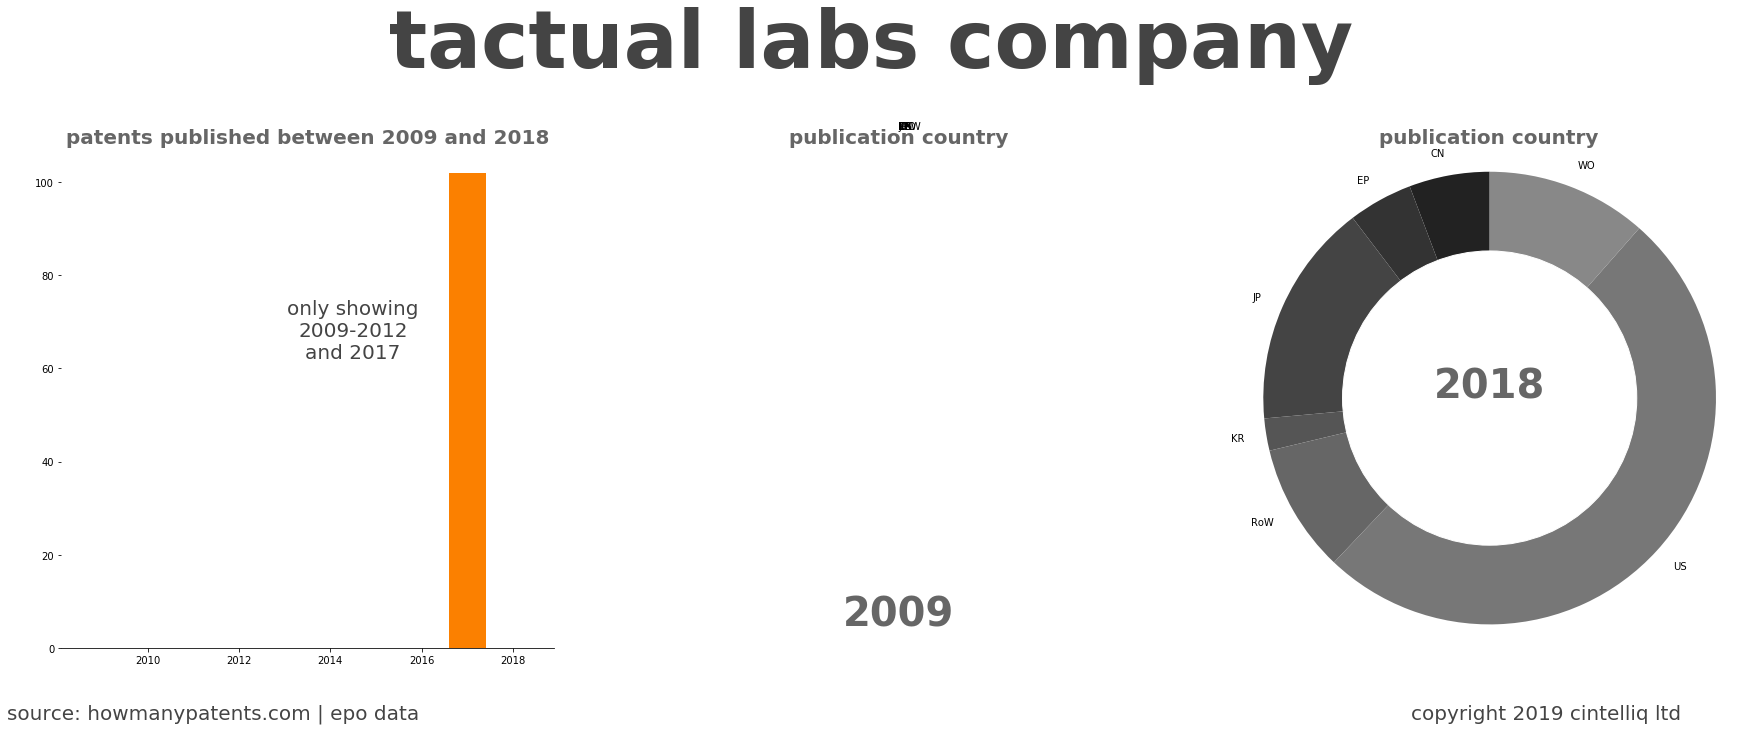 summary of patents for Tactual Labs Company